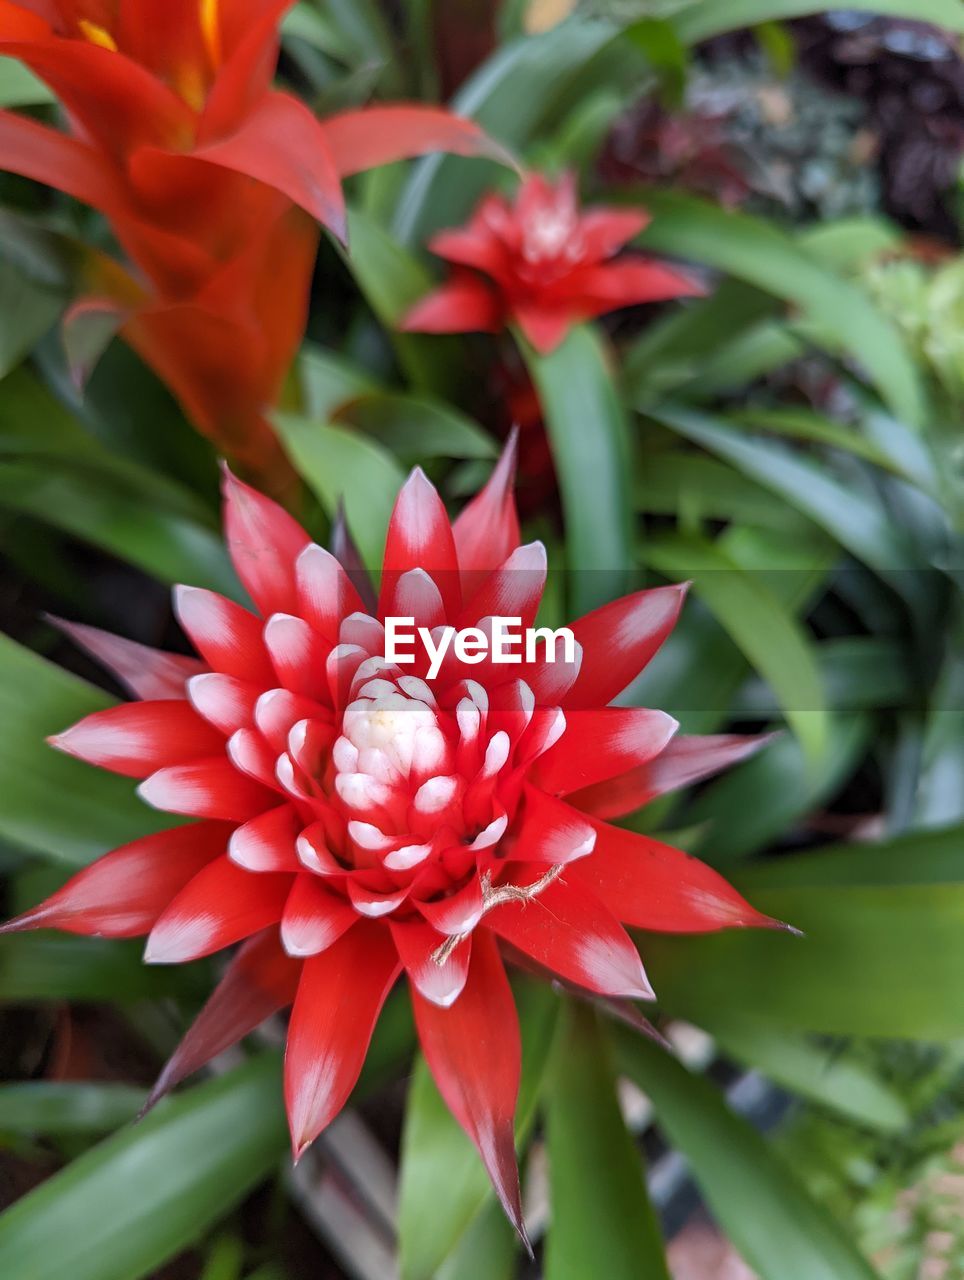 flower, flowering plant, plant, beauty in nature, petal, freshness, close-up, leaf, nature, red, plant part, growth, flower head, inflorescence, fragility, no people, outdoors, focus on foreground, blossom, green, pink, vibrant color, botany, tropical climate